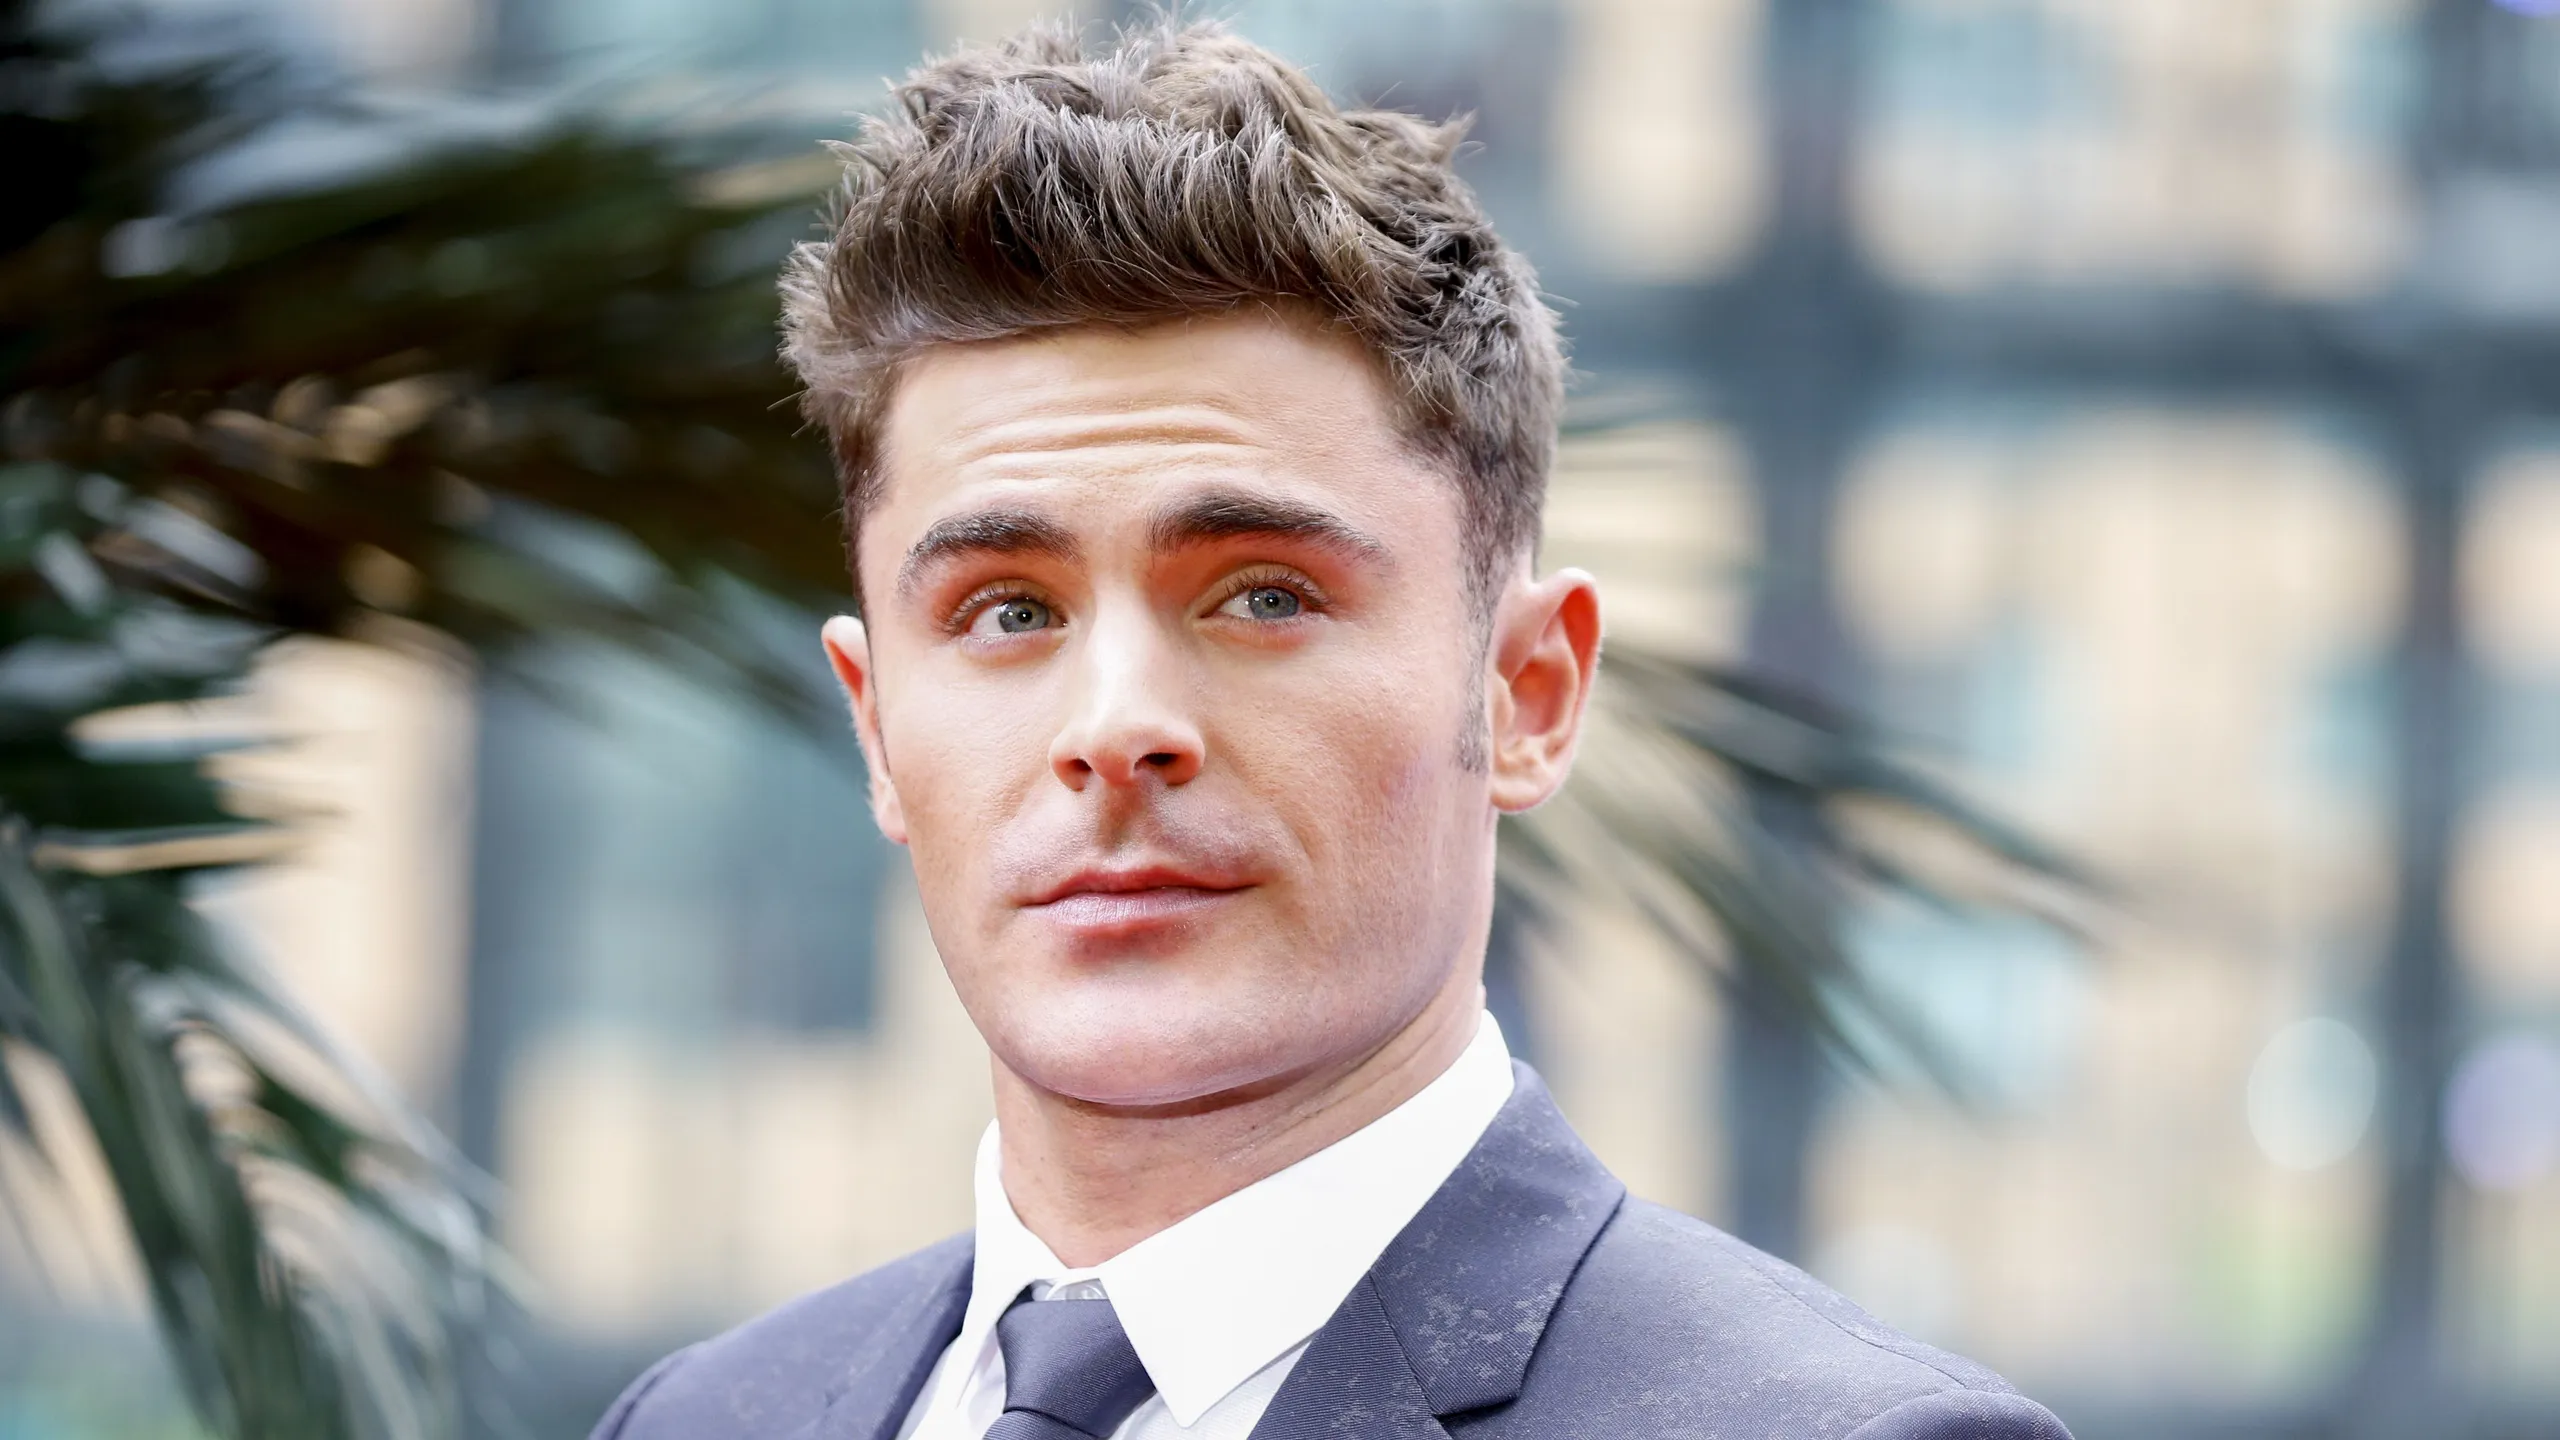 Zac Efron's Hairstyle